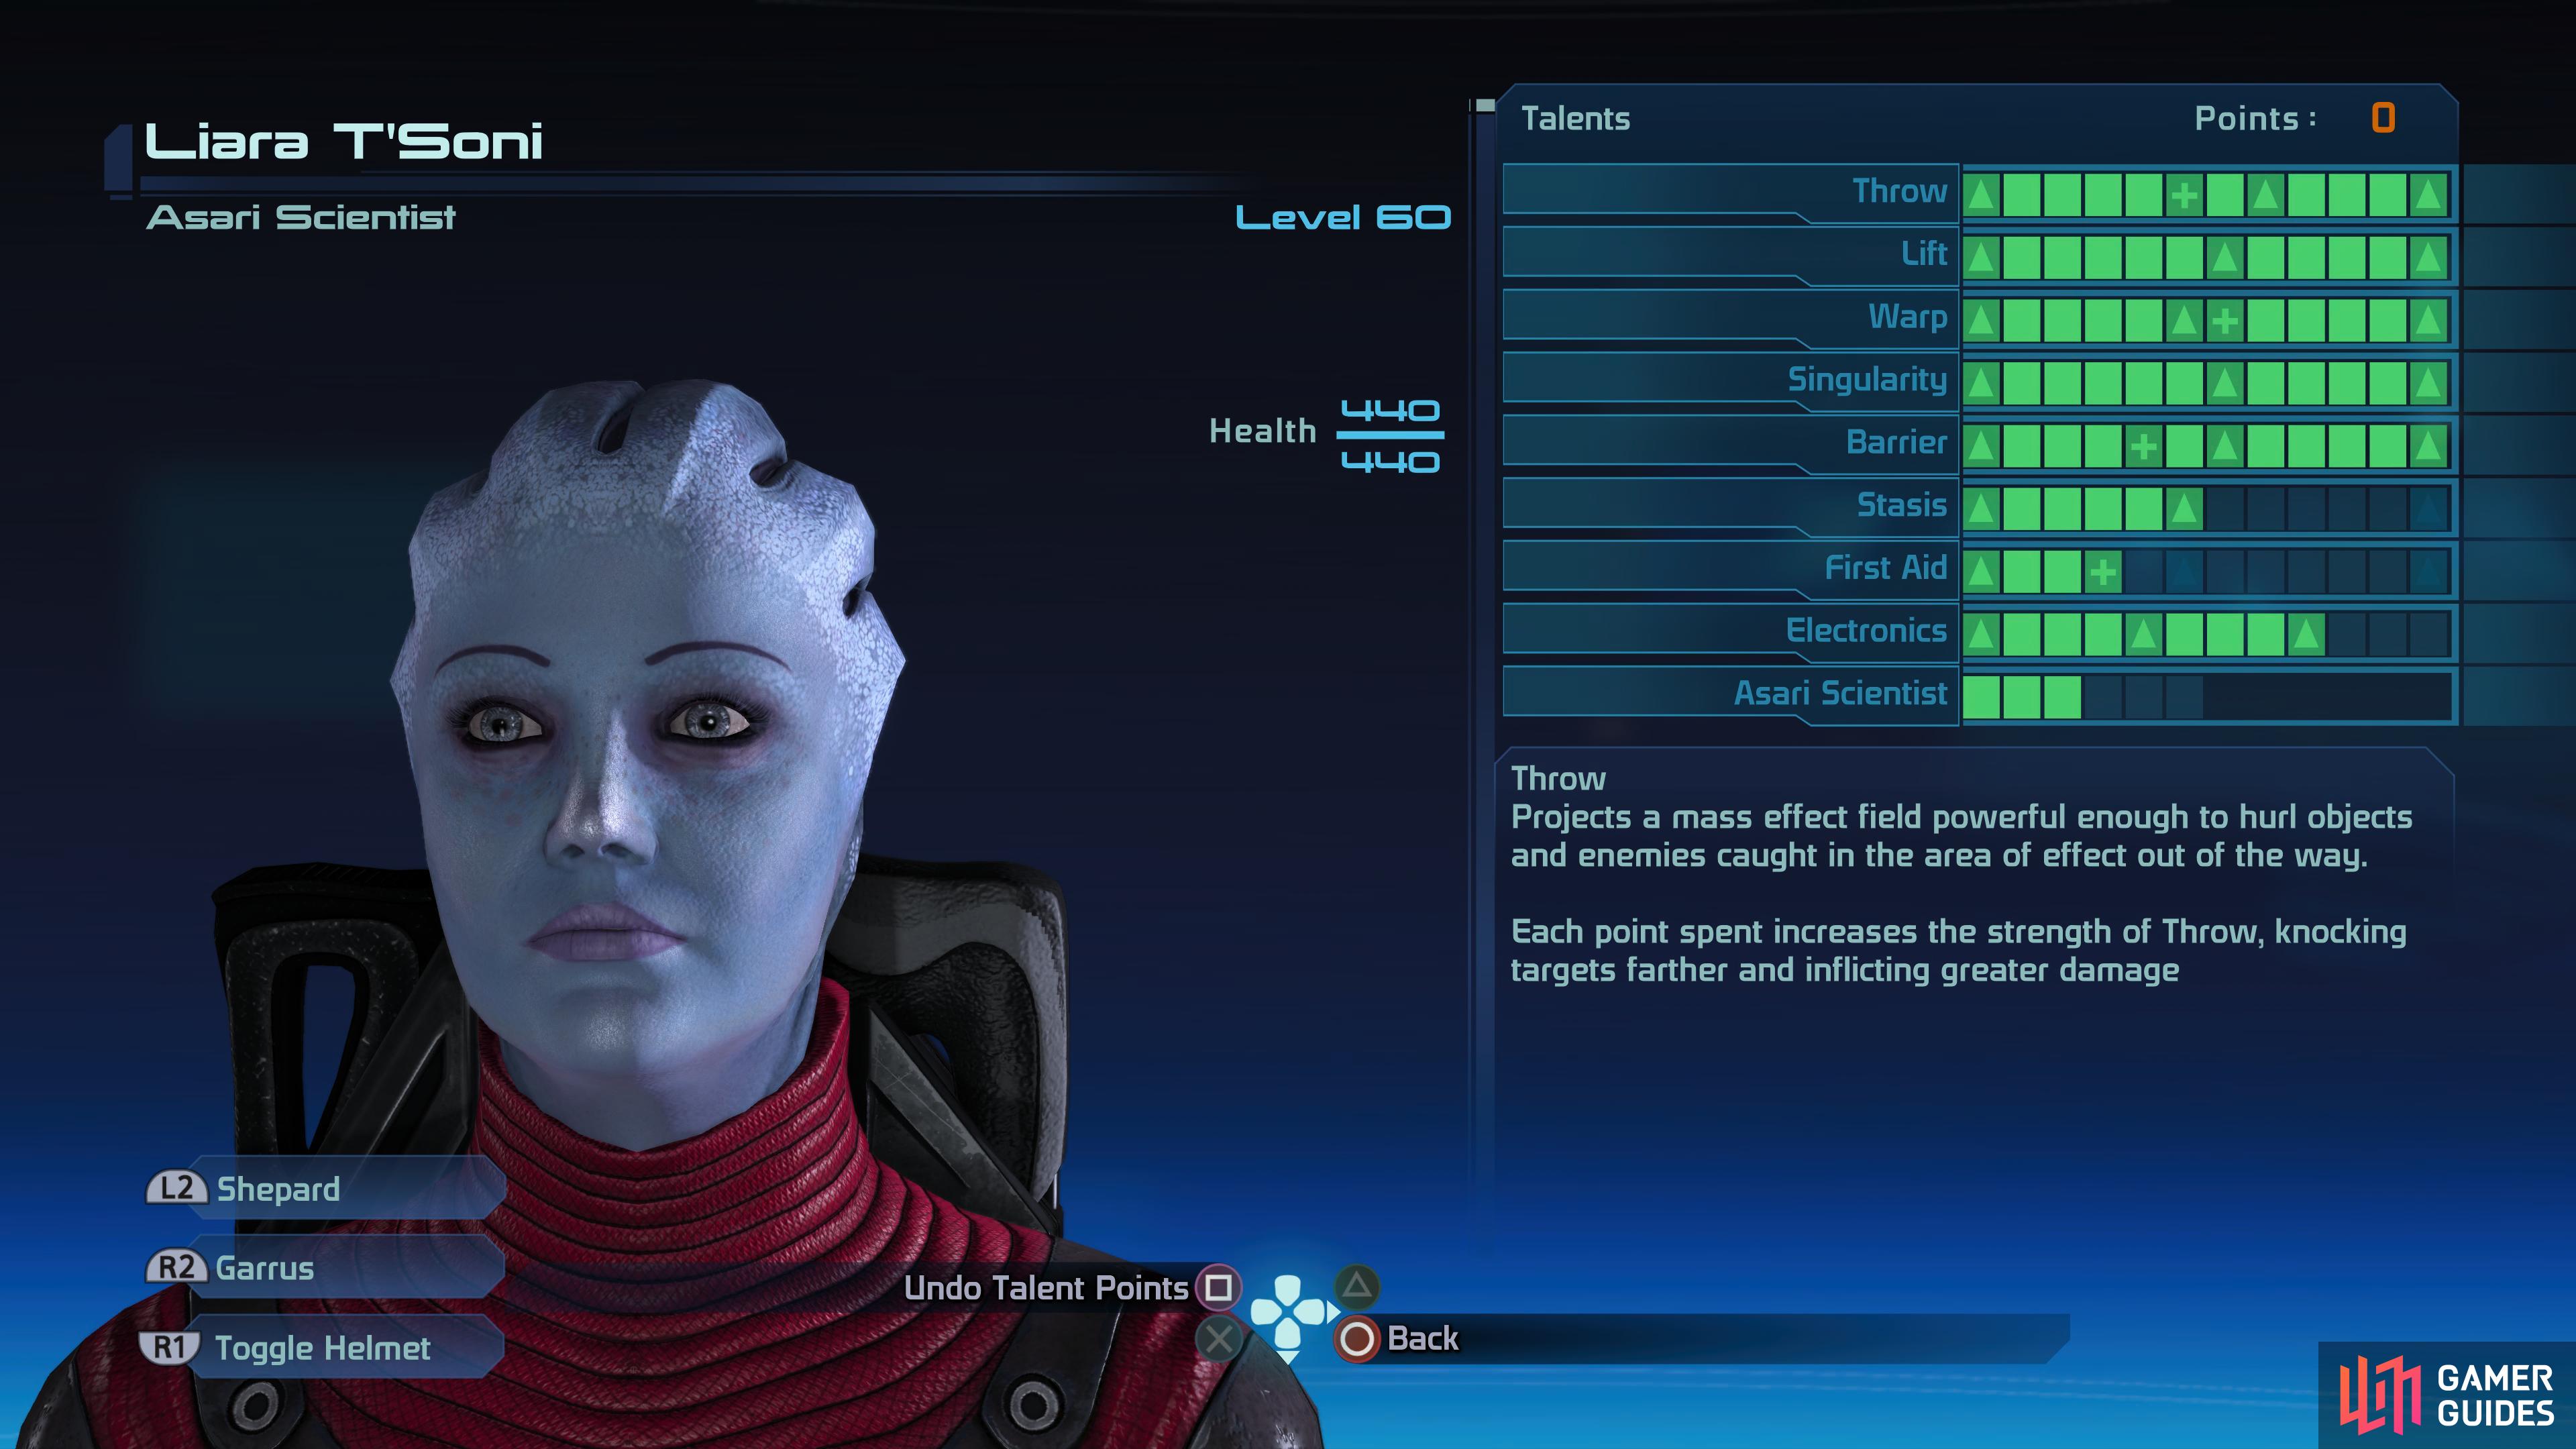 Suggested talent point allocation for Liara.